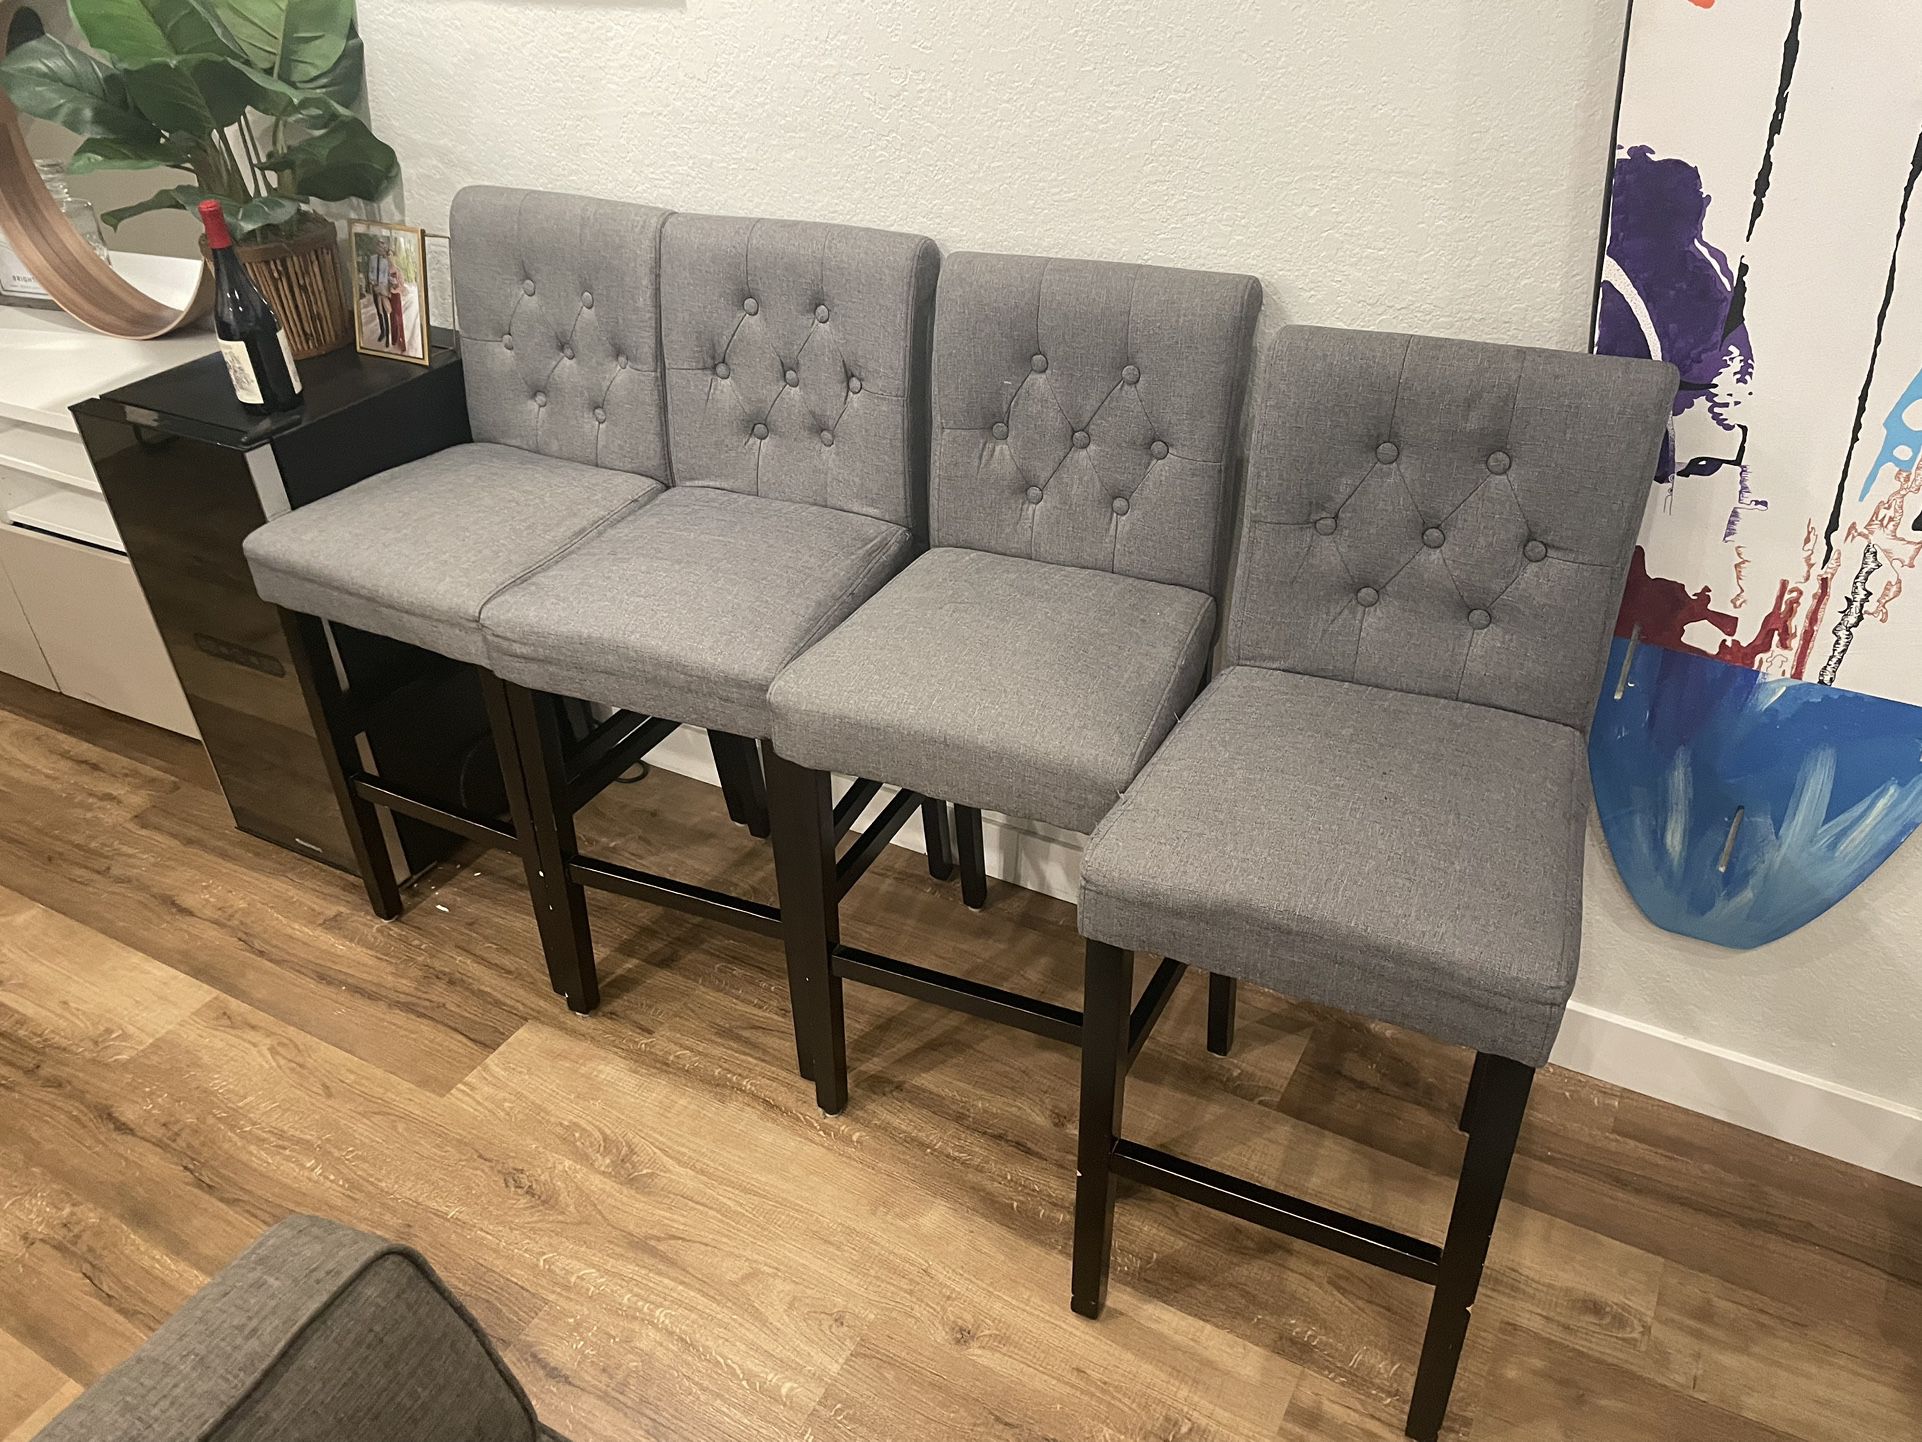 Set Of Four Very Good Condition Barstool Chairs / Seats / Cushioned Fabric Sitting Etc